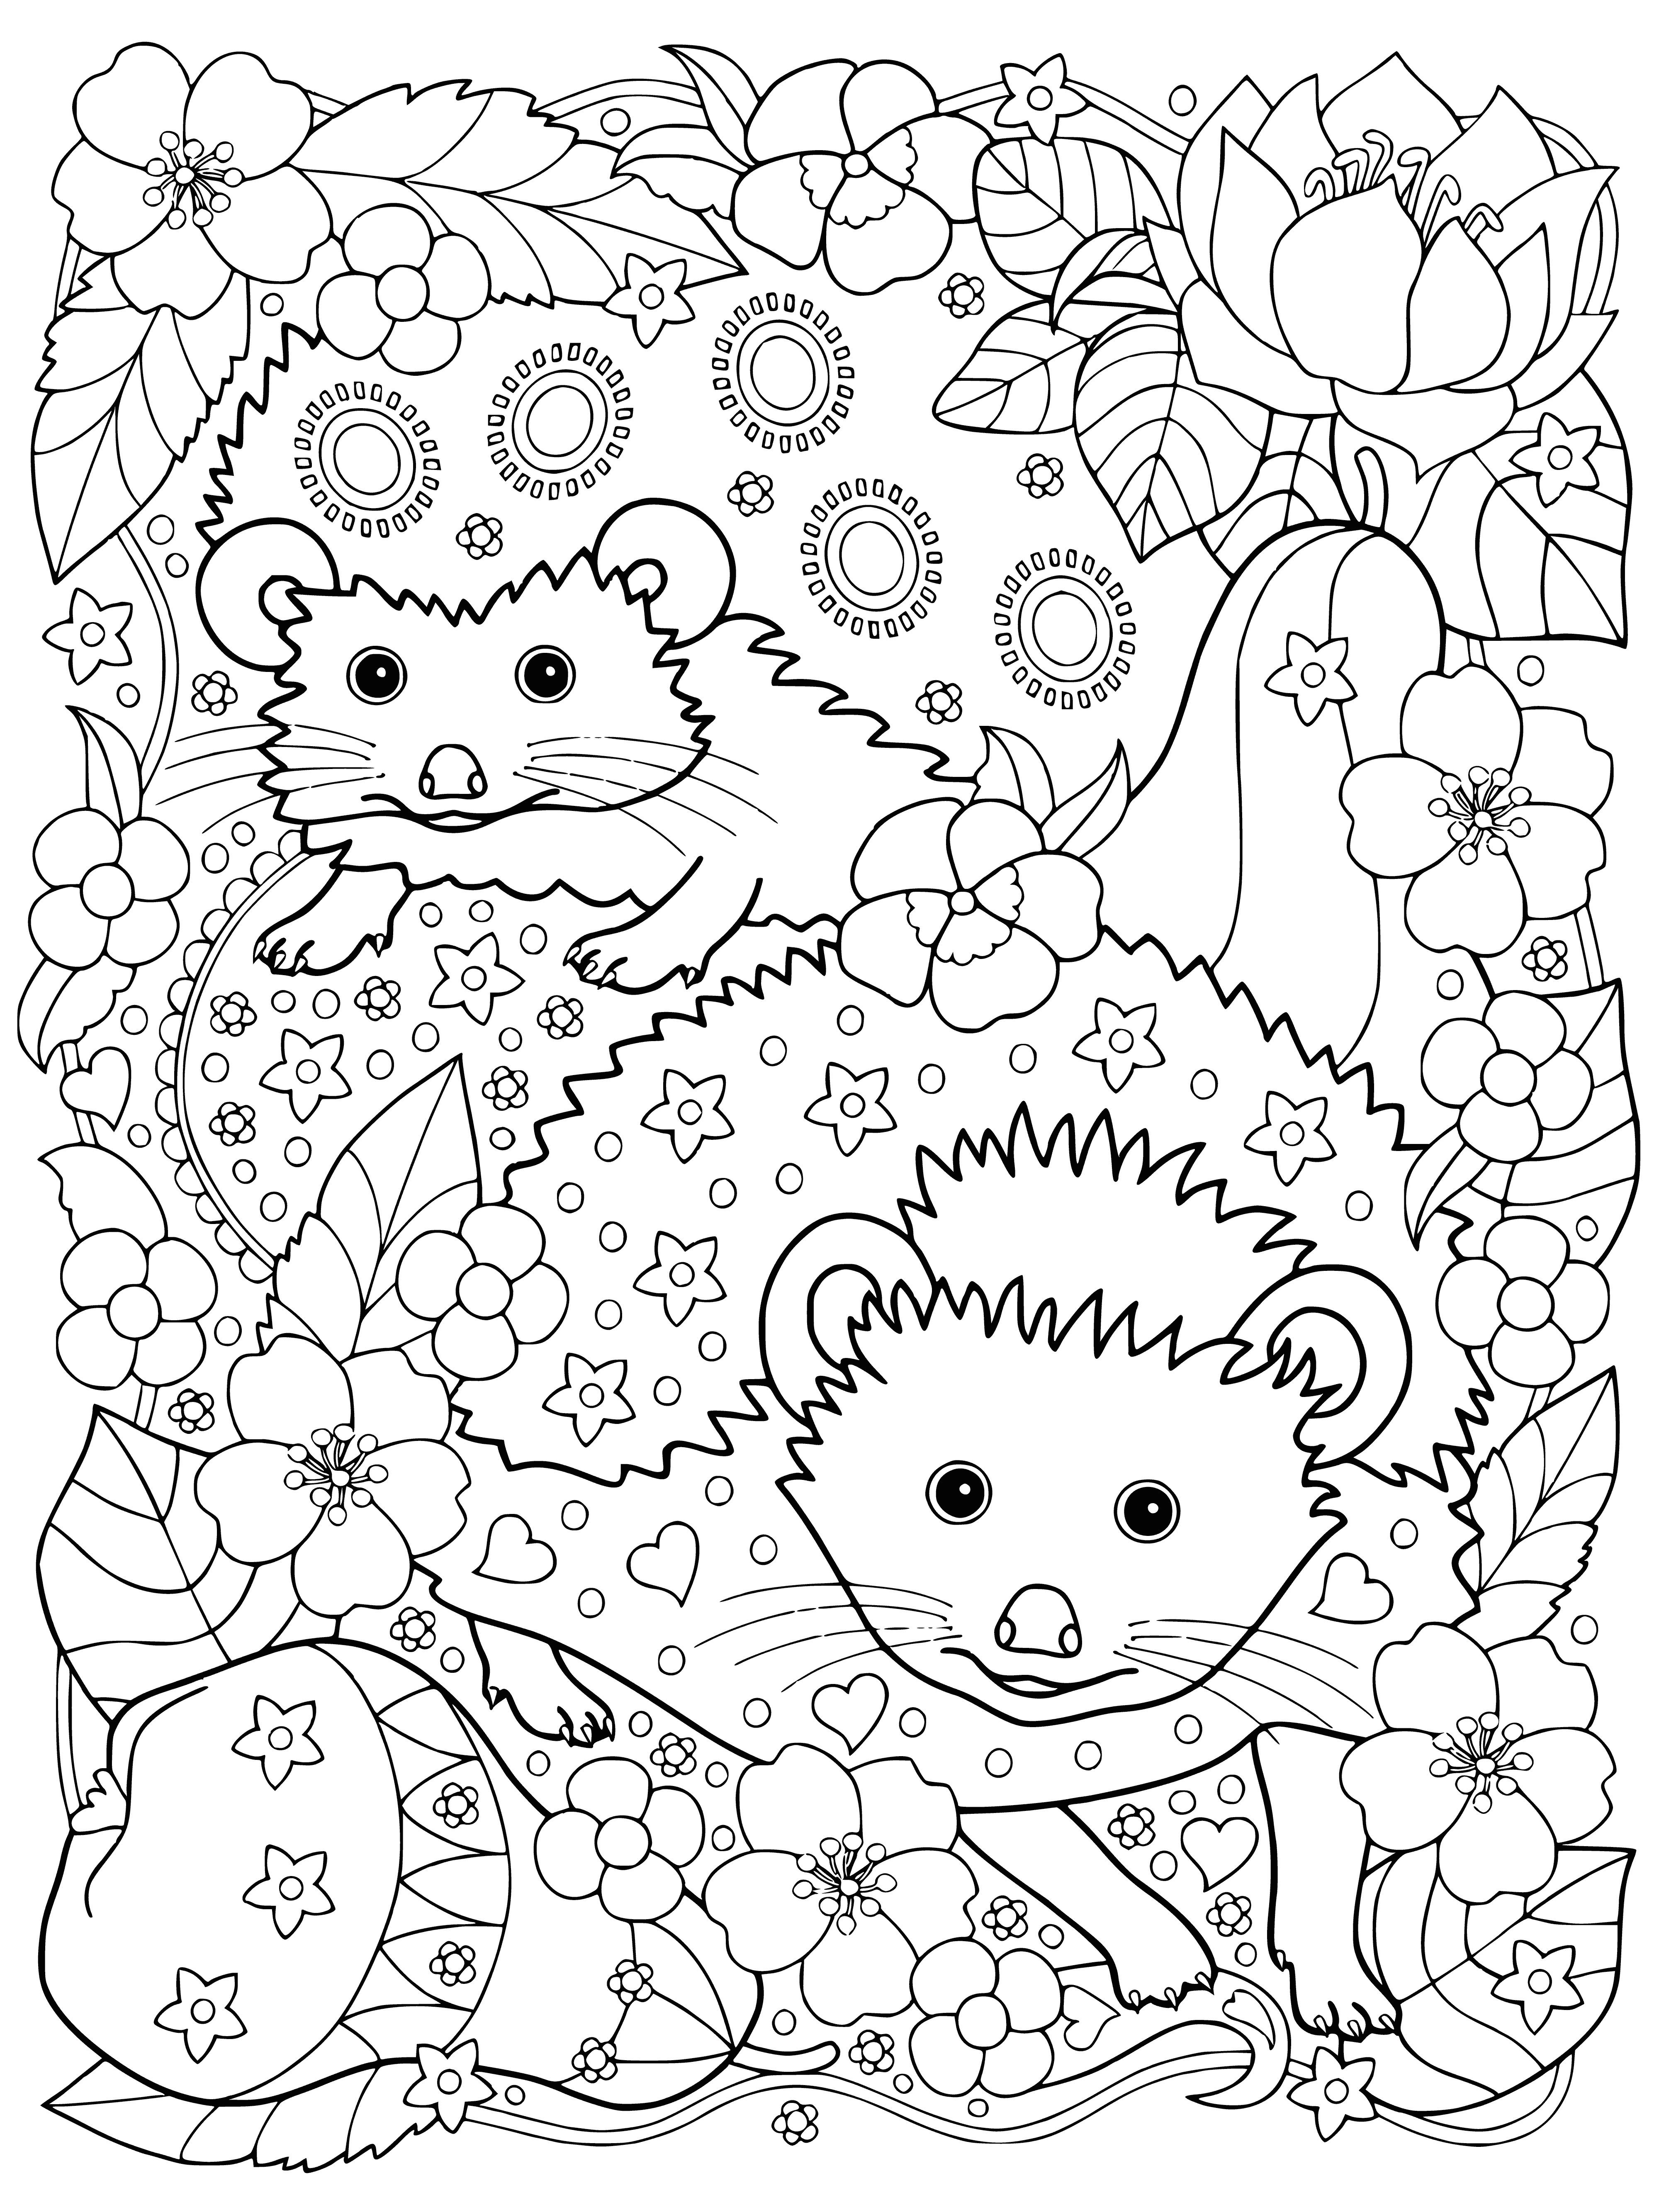 Hedgehogs coloring page